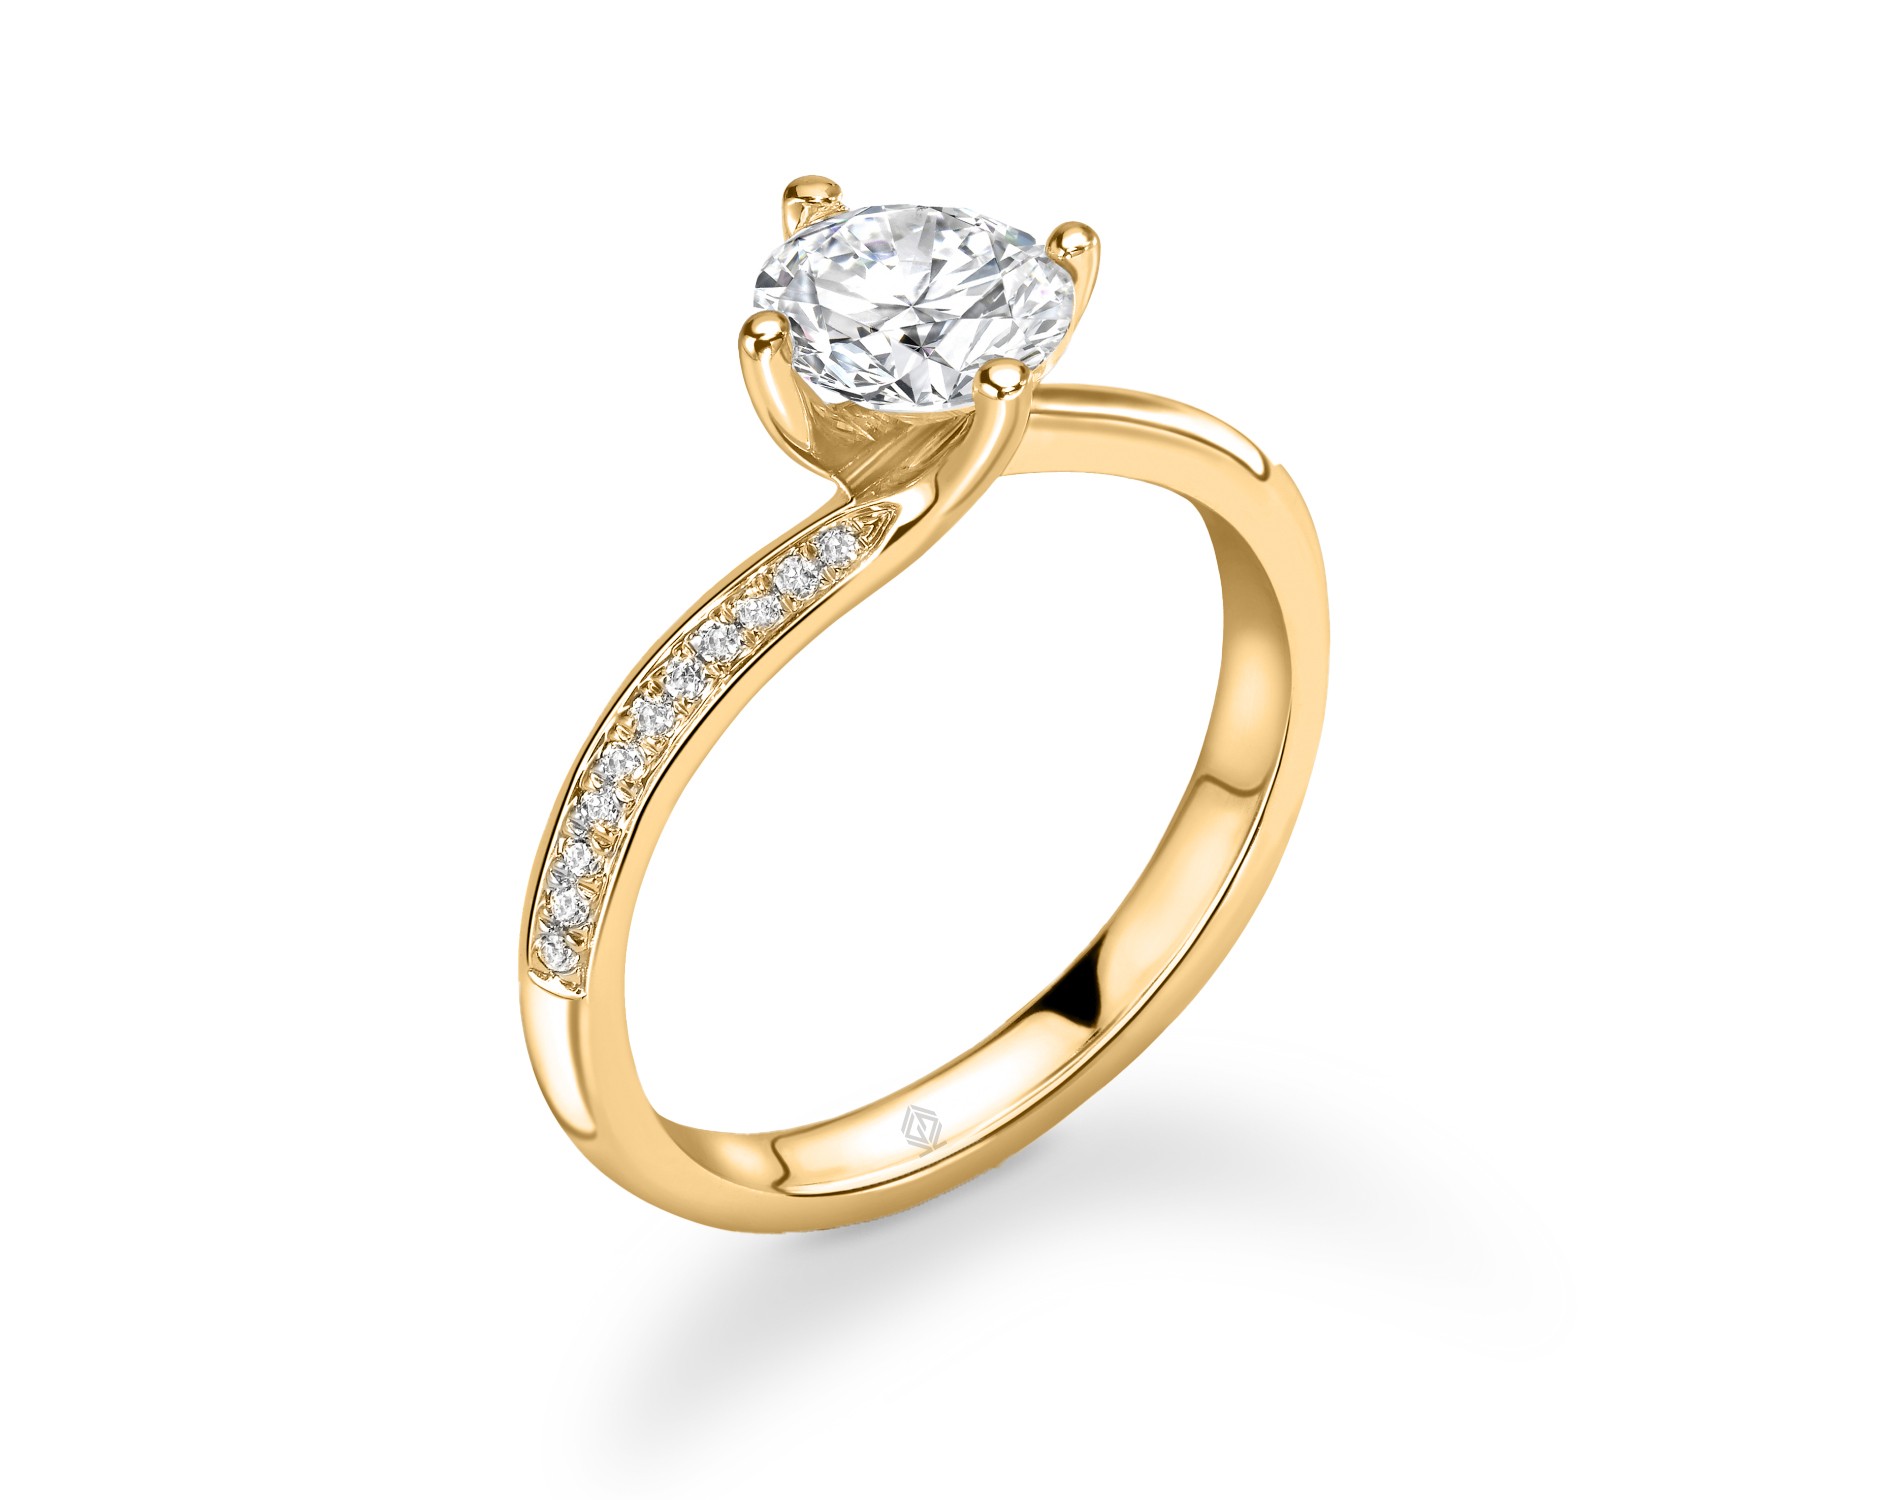 18K YELLOW GOLD ROUND CUT 4 PRONG TWIST DIAMOND ENGAGEMENT RING WITH SIDE STONES